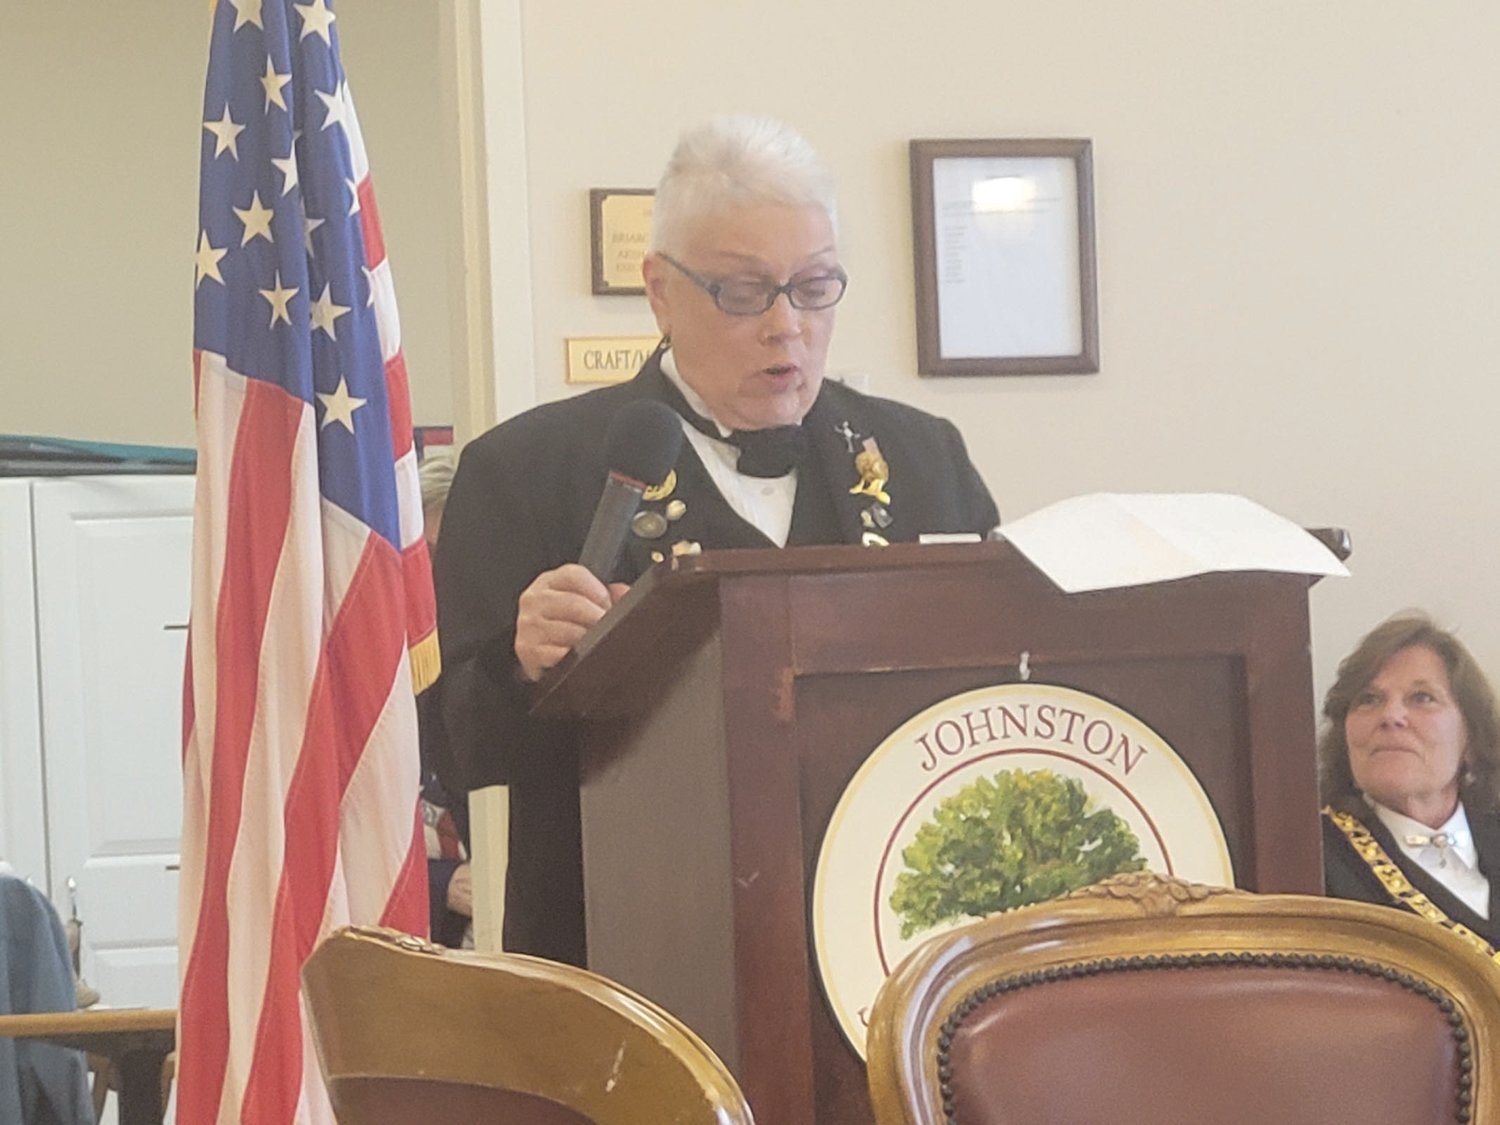 UNDER GOD: Ann Licciardi, Tri-City Elks’ Inner Guard, took to the lectern to deliver a heartfelt reading about the U.S. flag and its meaning.